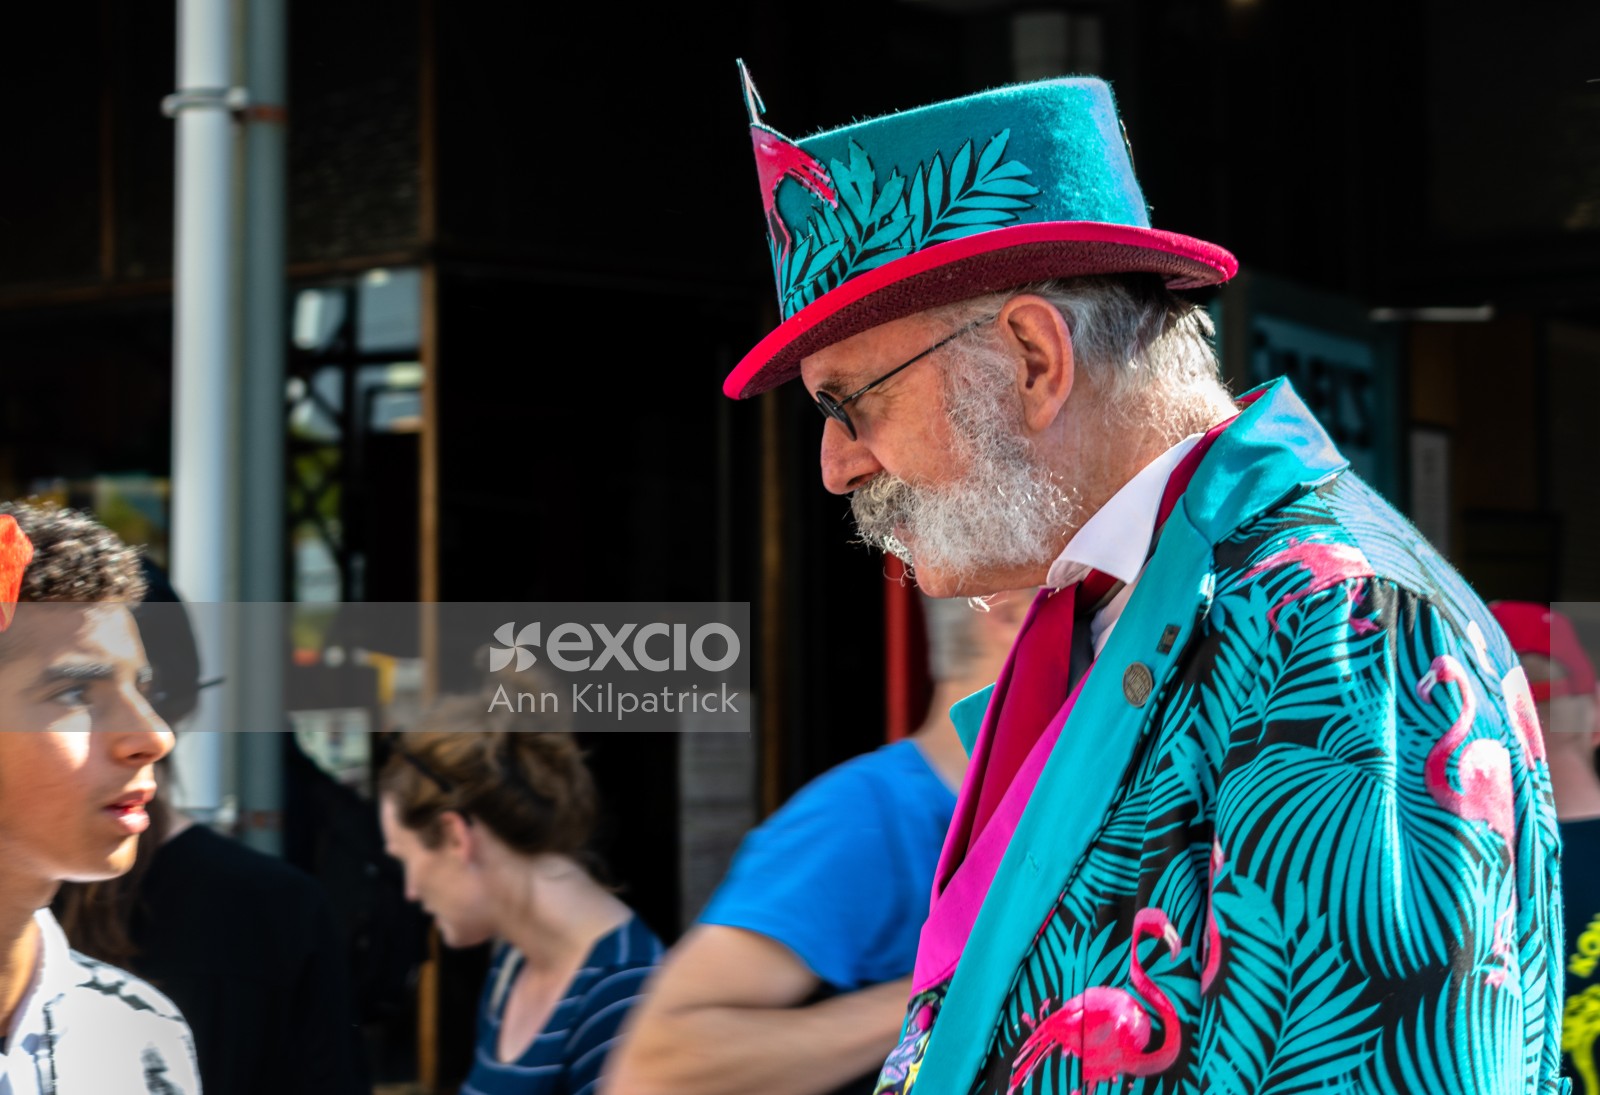 Man in tourquoise suit and hat